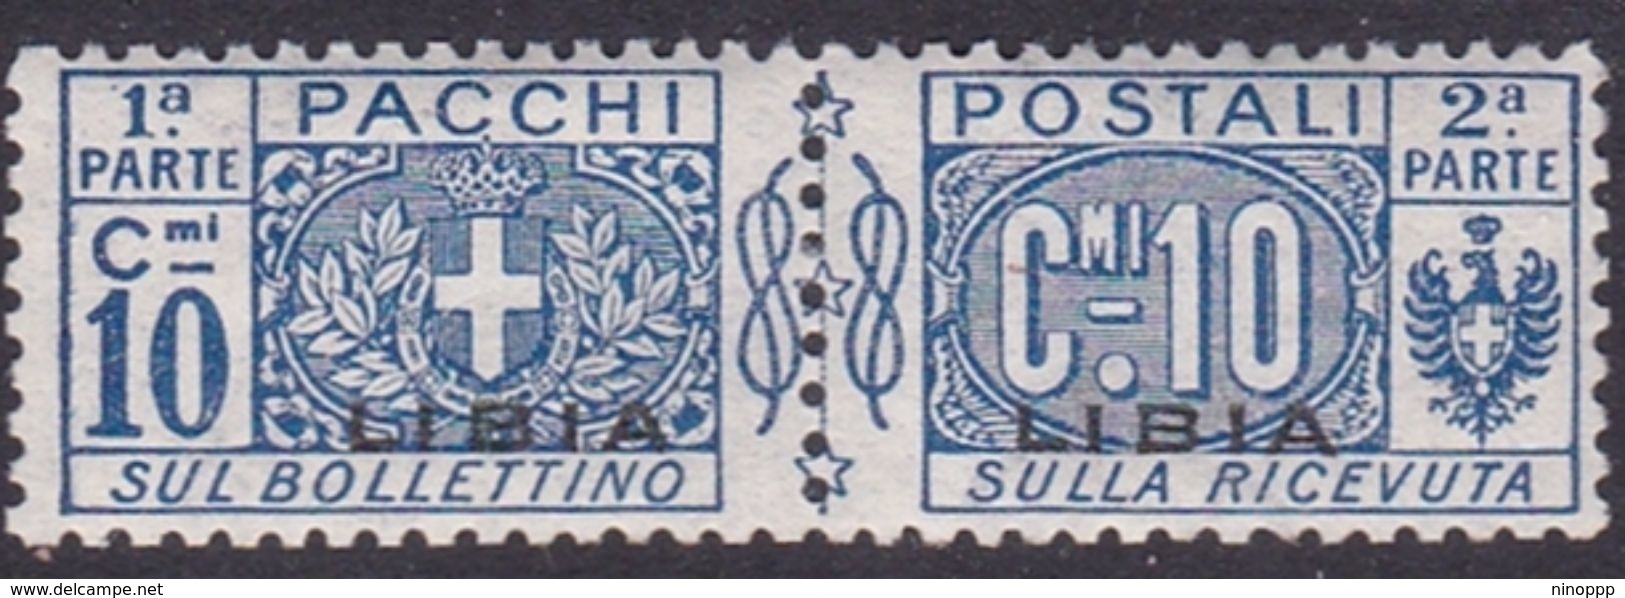 Italy-Colonies And Territories-Libya PP 2 1915-24 Parcel Post,10c Blue,mint Hinged - Libia